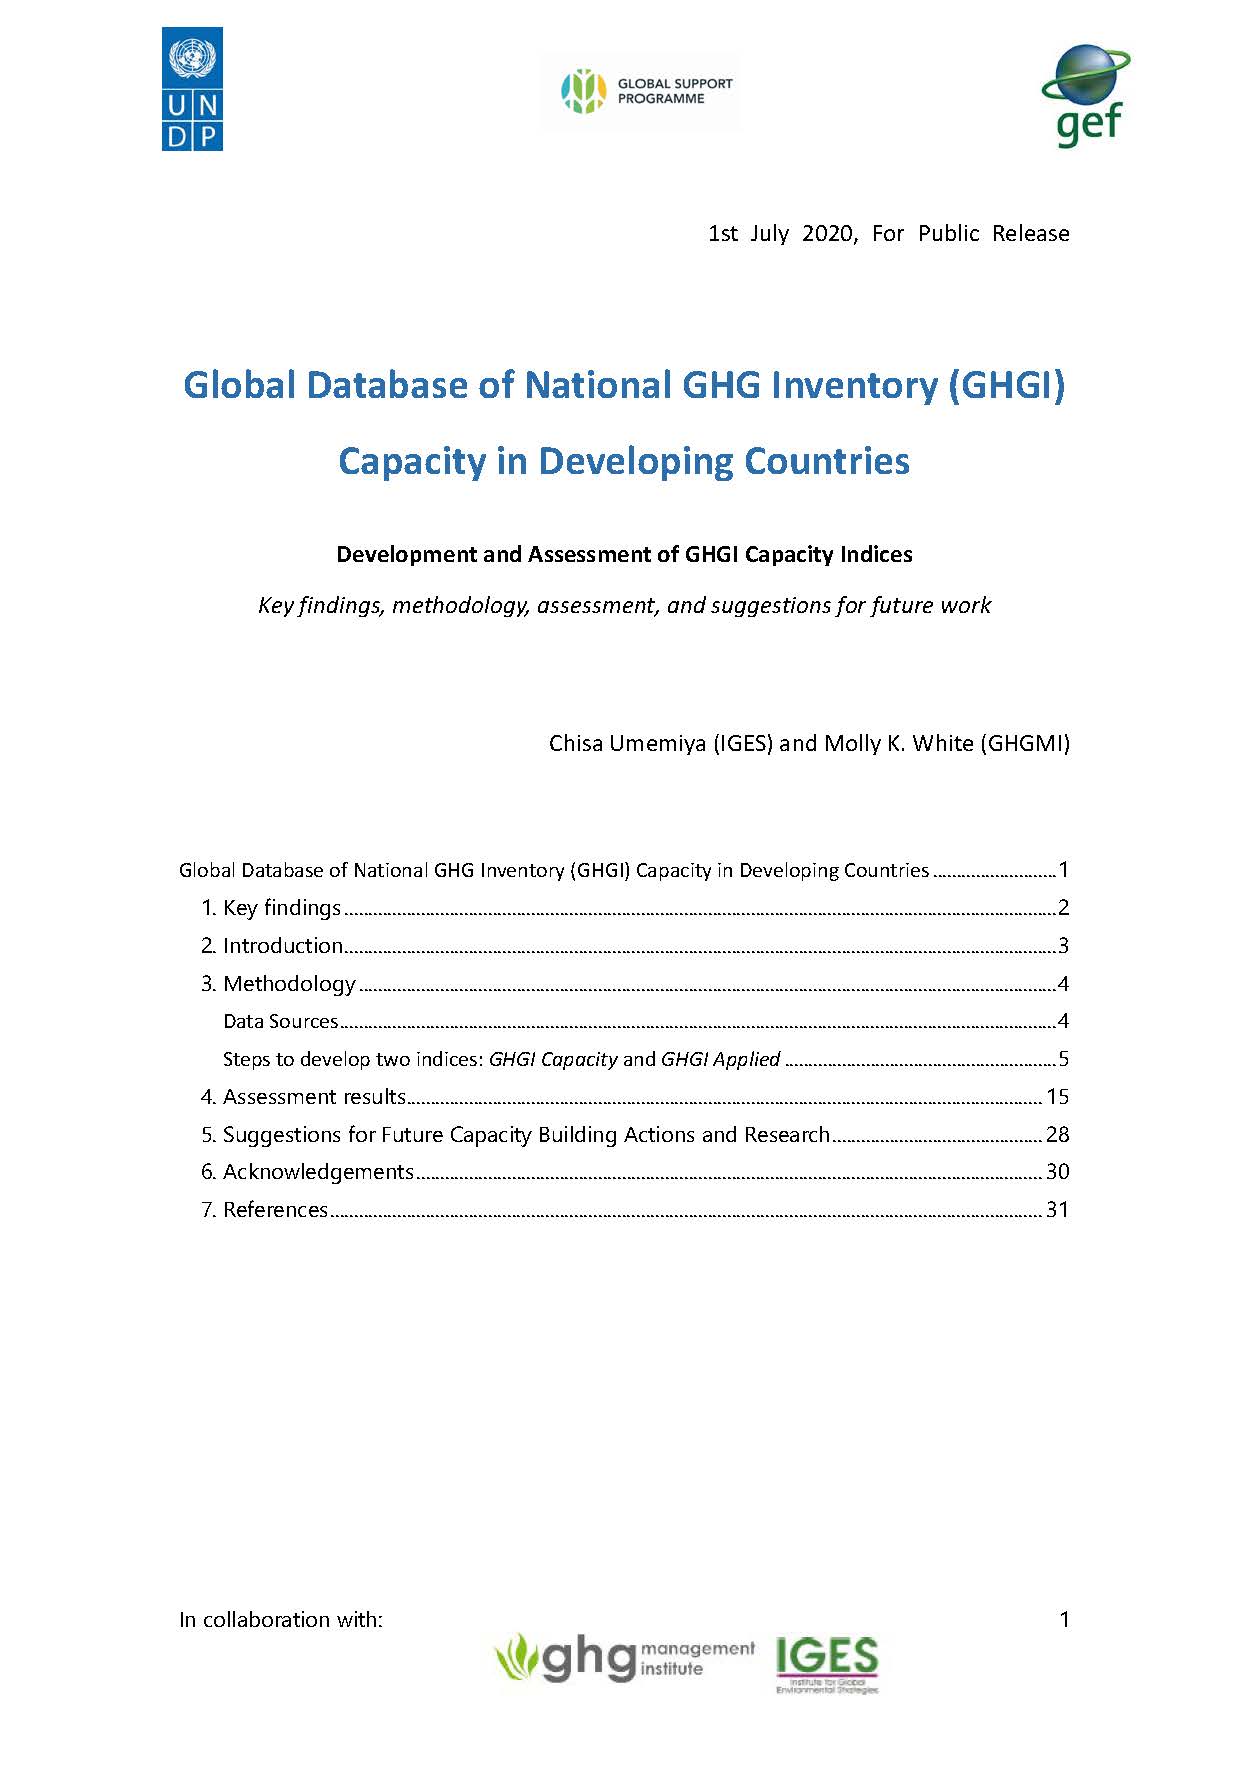 Global Database of National GHG Inventory (GHGI) Capacity in Developing Countries